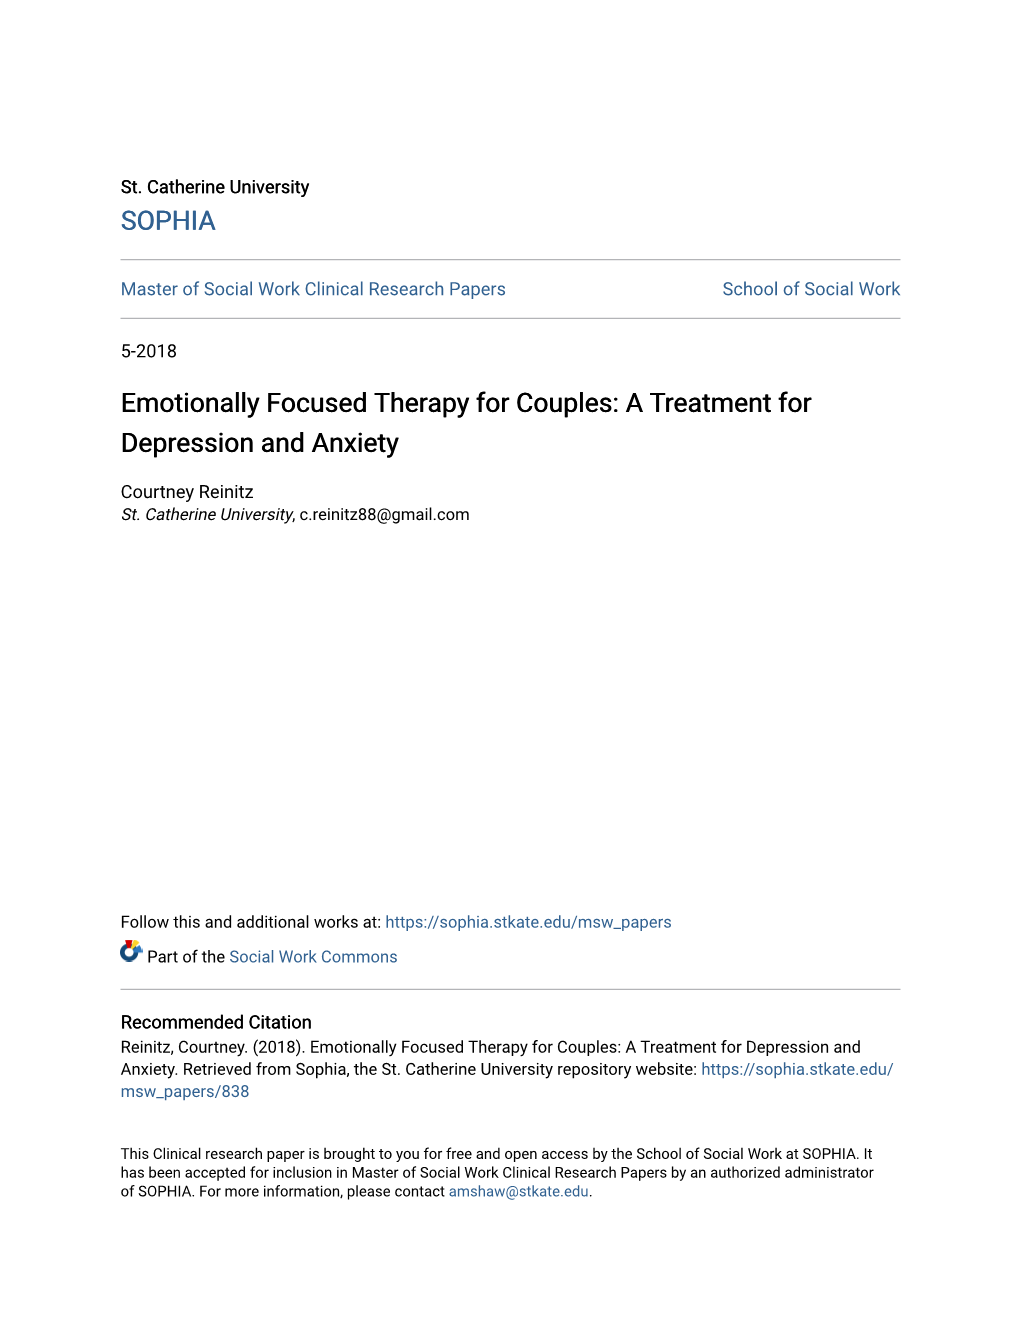 Emotionally Focused Therapy for Couples: a Treatment for Depression and Anxiety